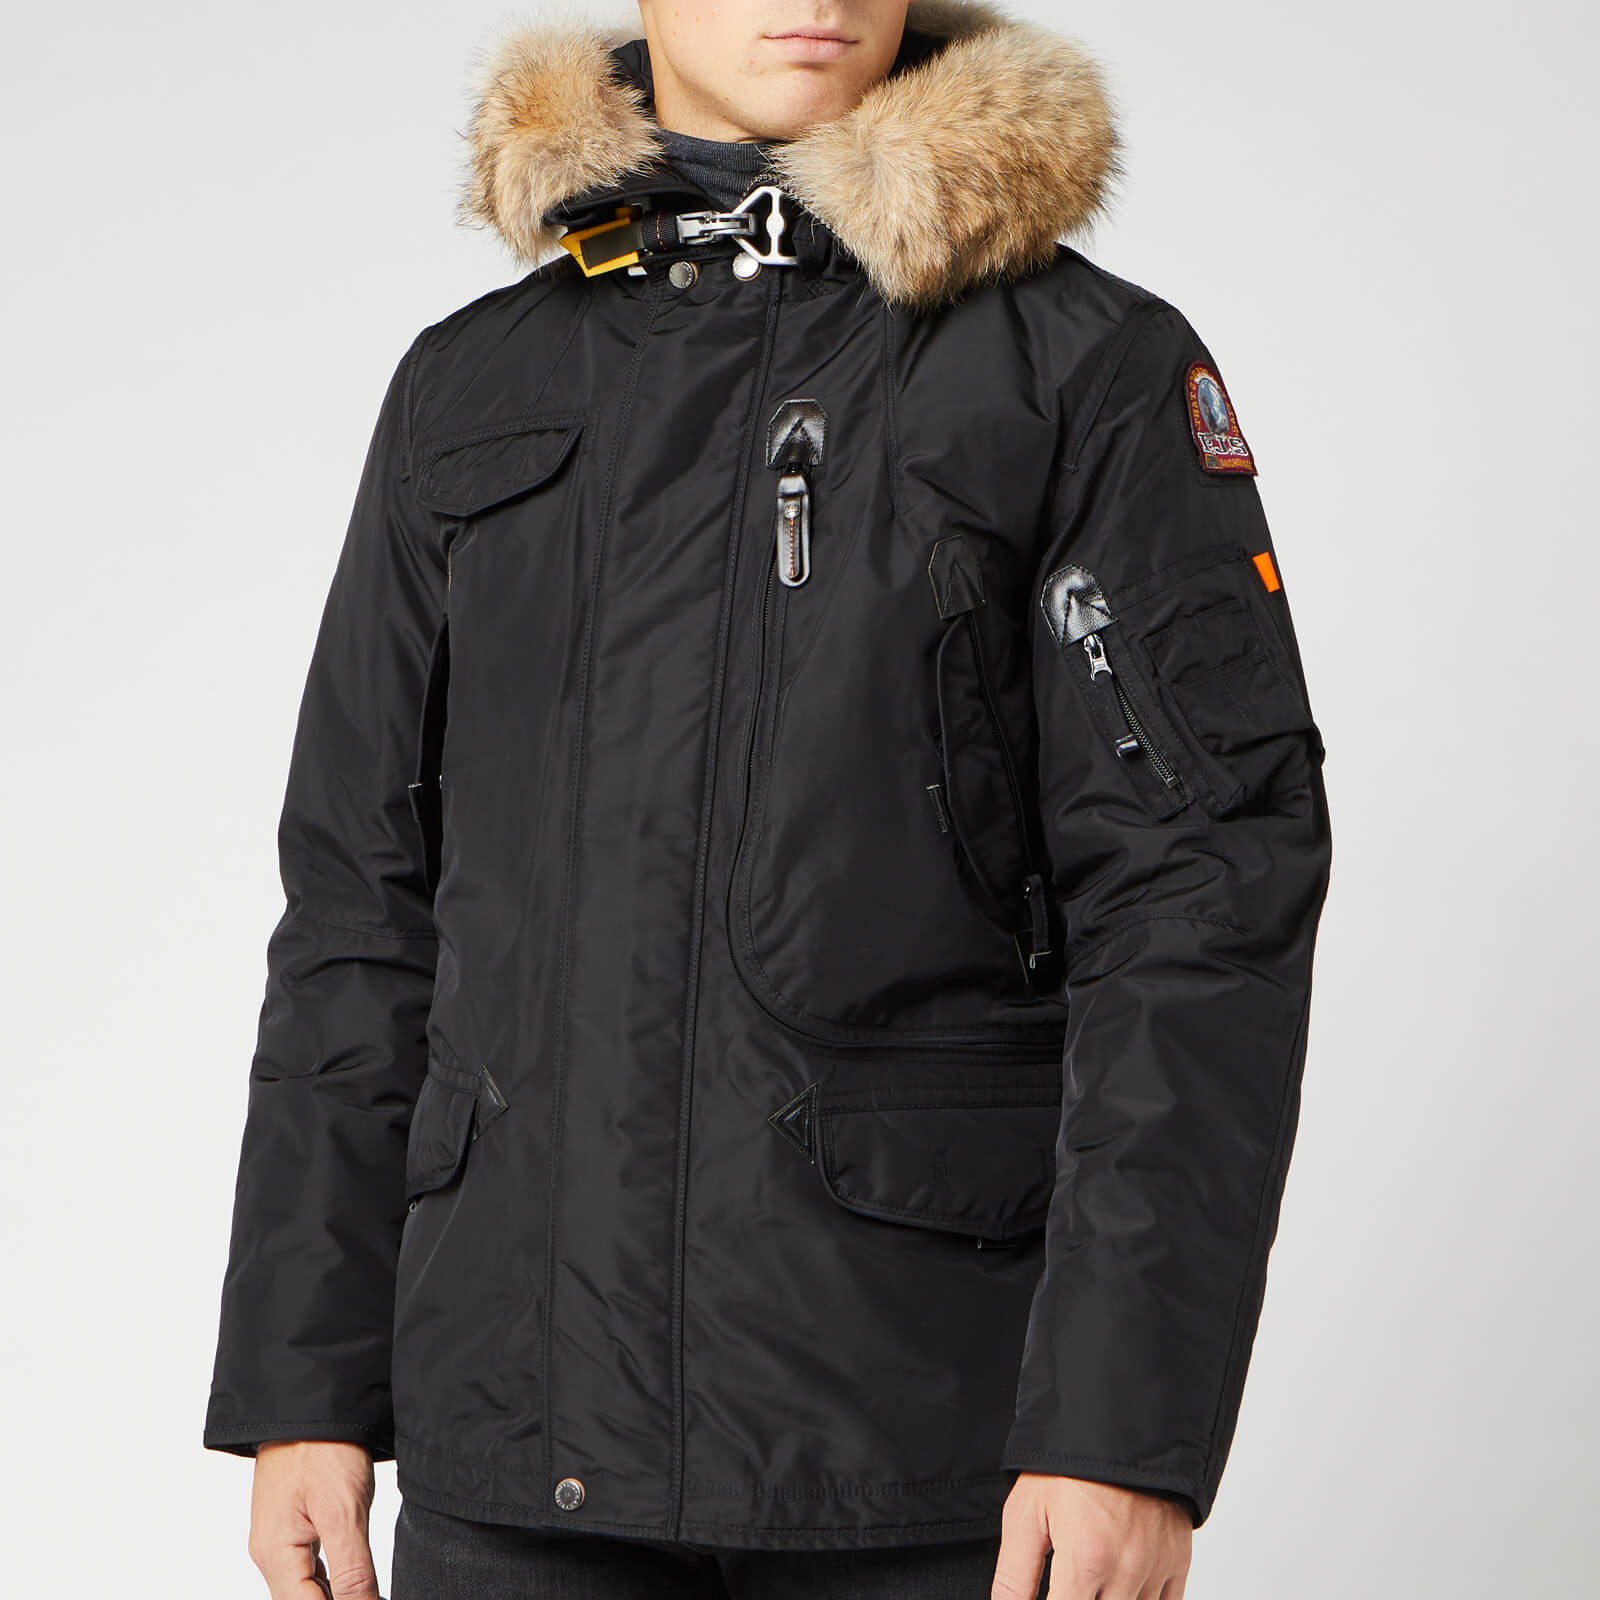 Parajumpers Men's Right Hand Jacket - Black - S